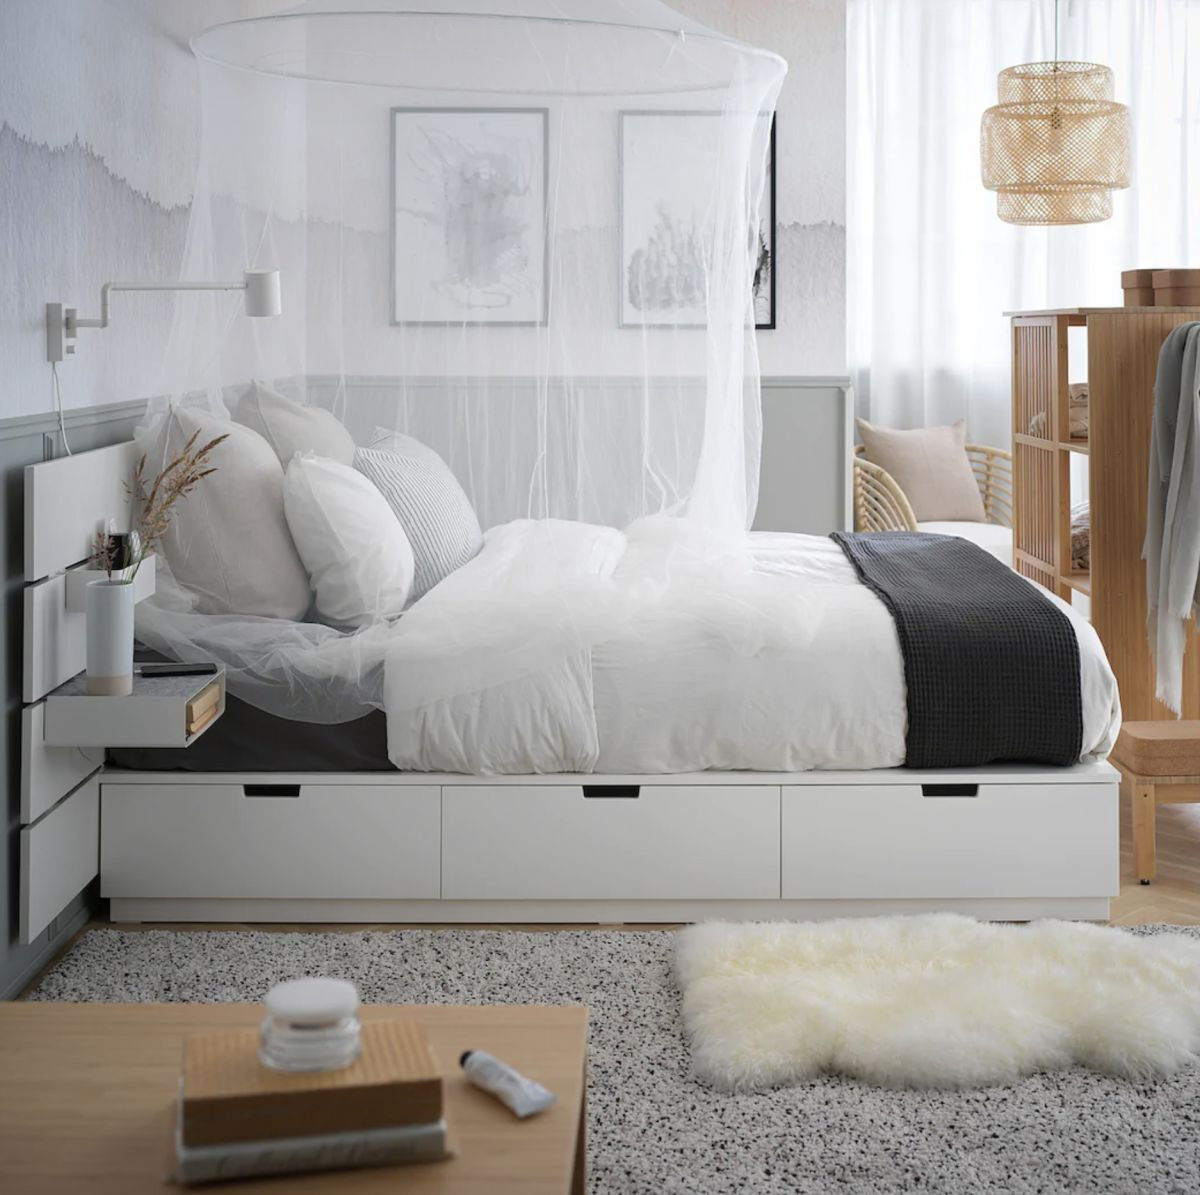 Ikea Bedroom Storage
 These 3 Ikea storage beds will solve all your small